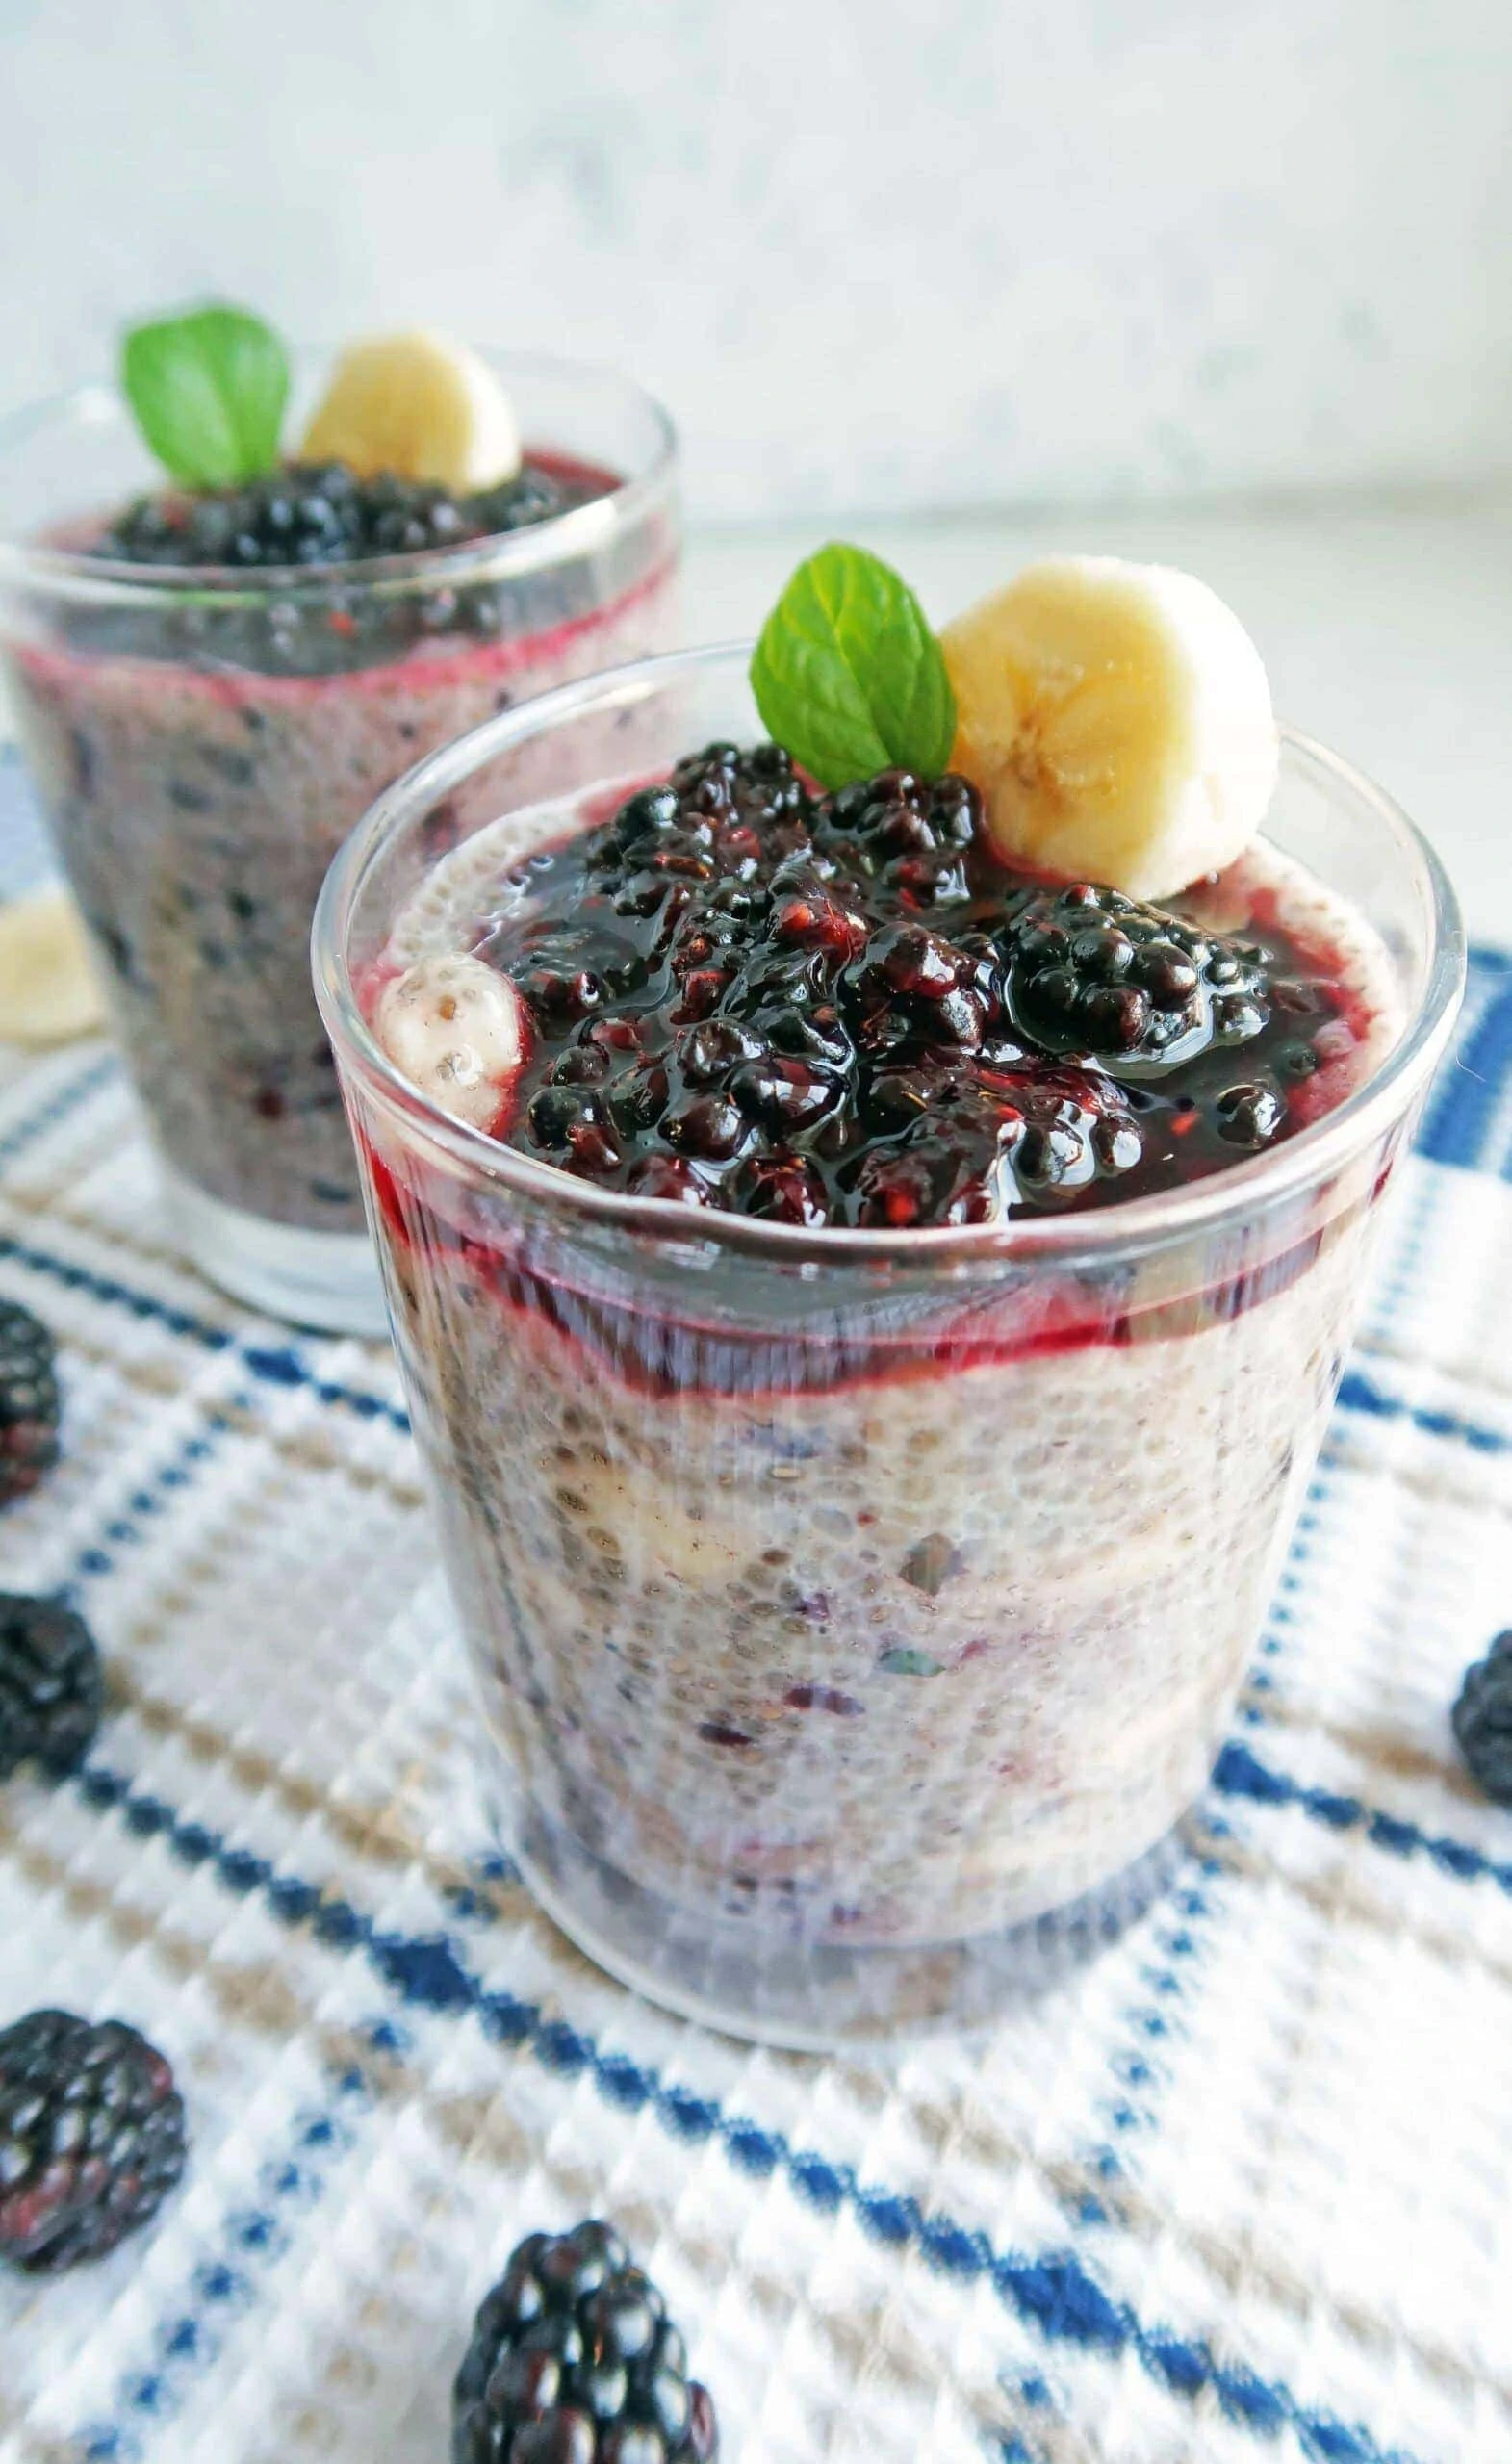 https://www.yayforfood.com/wp-content/uploads/overnight-chia-seed-pudding-blackberries-bananas-featured-scaled.jpg.webp